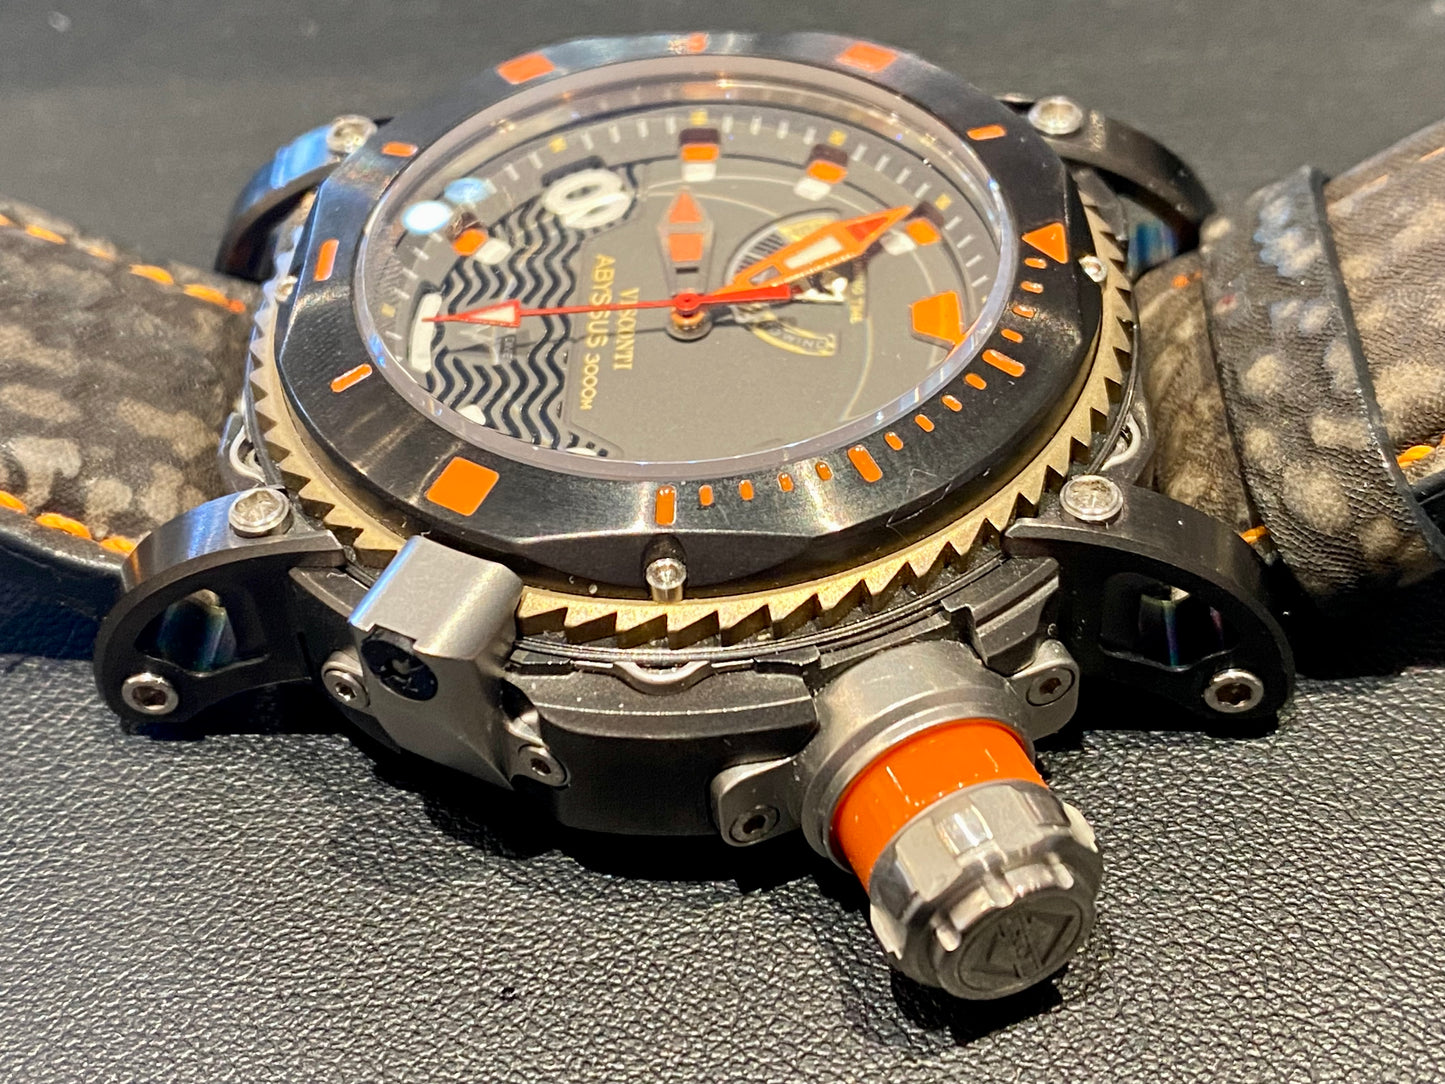 VISCONTI SPORT DIVE ABYSSUS WATCH